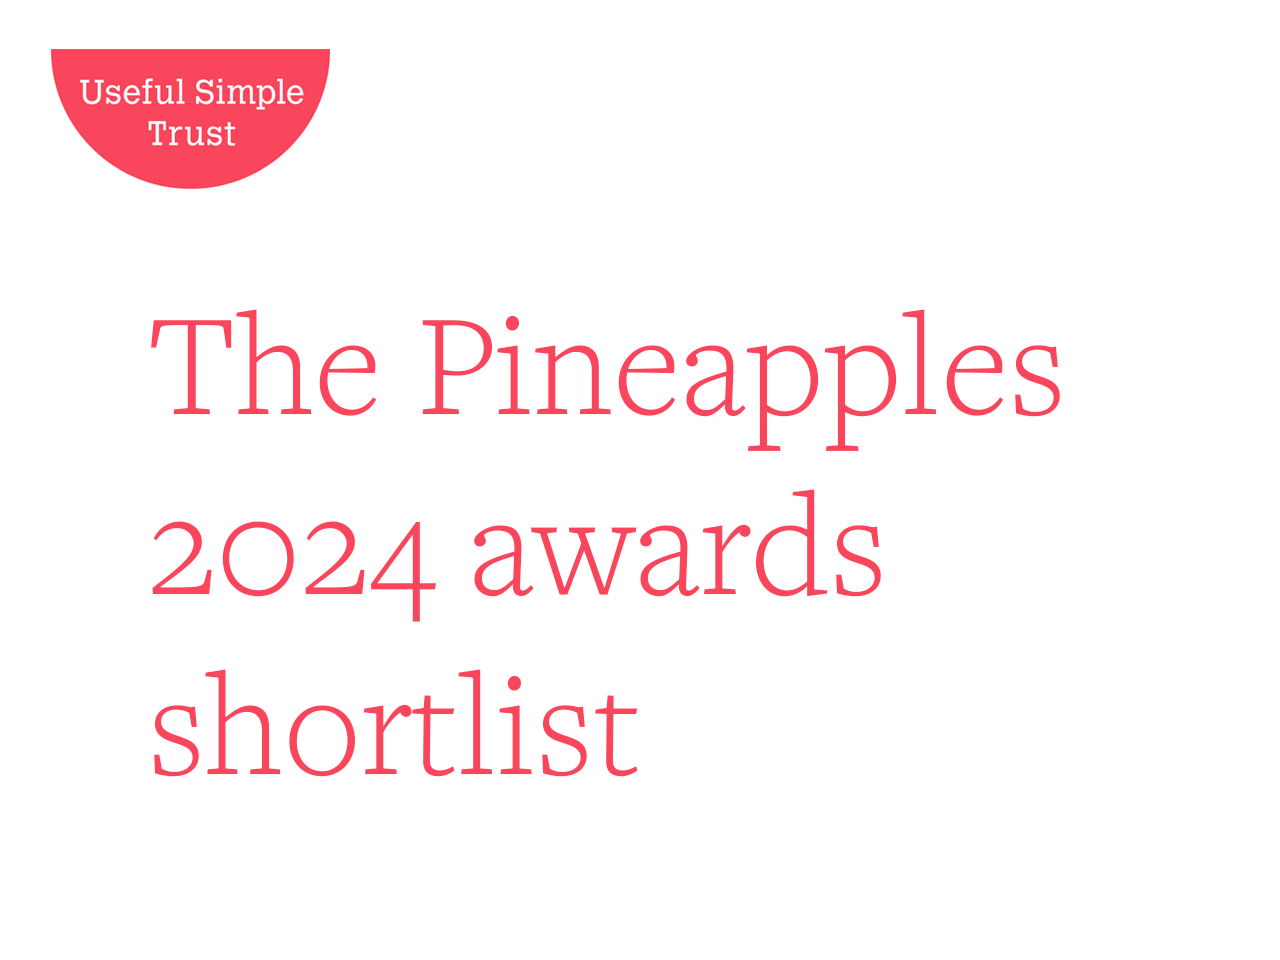 Six projects shortlisted for The Pineapples 2024 awards